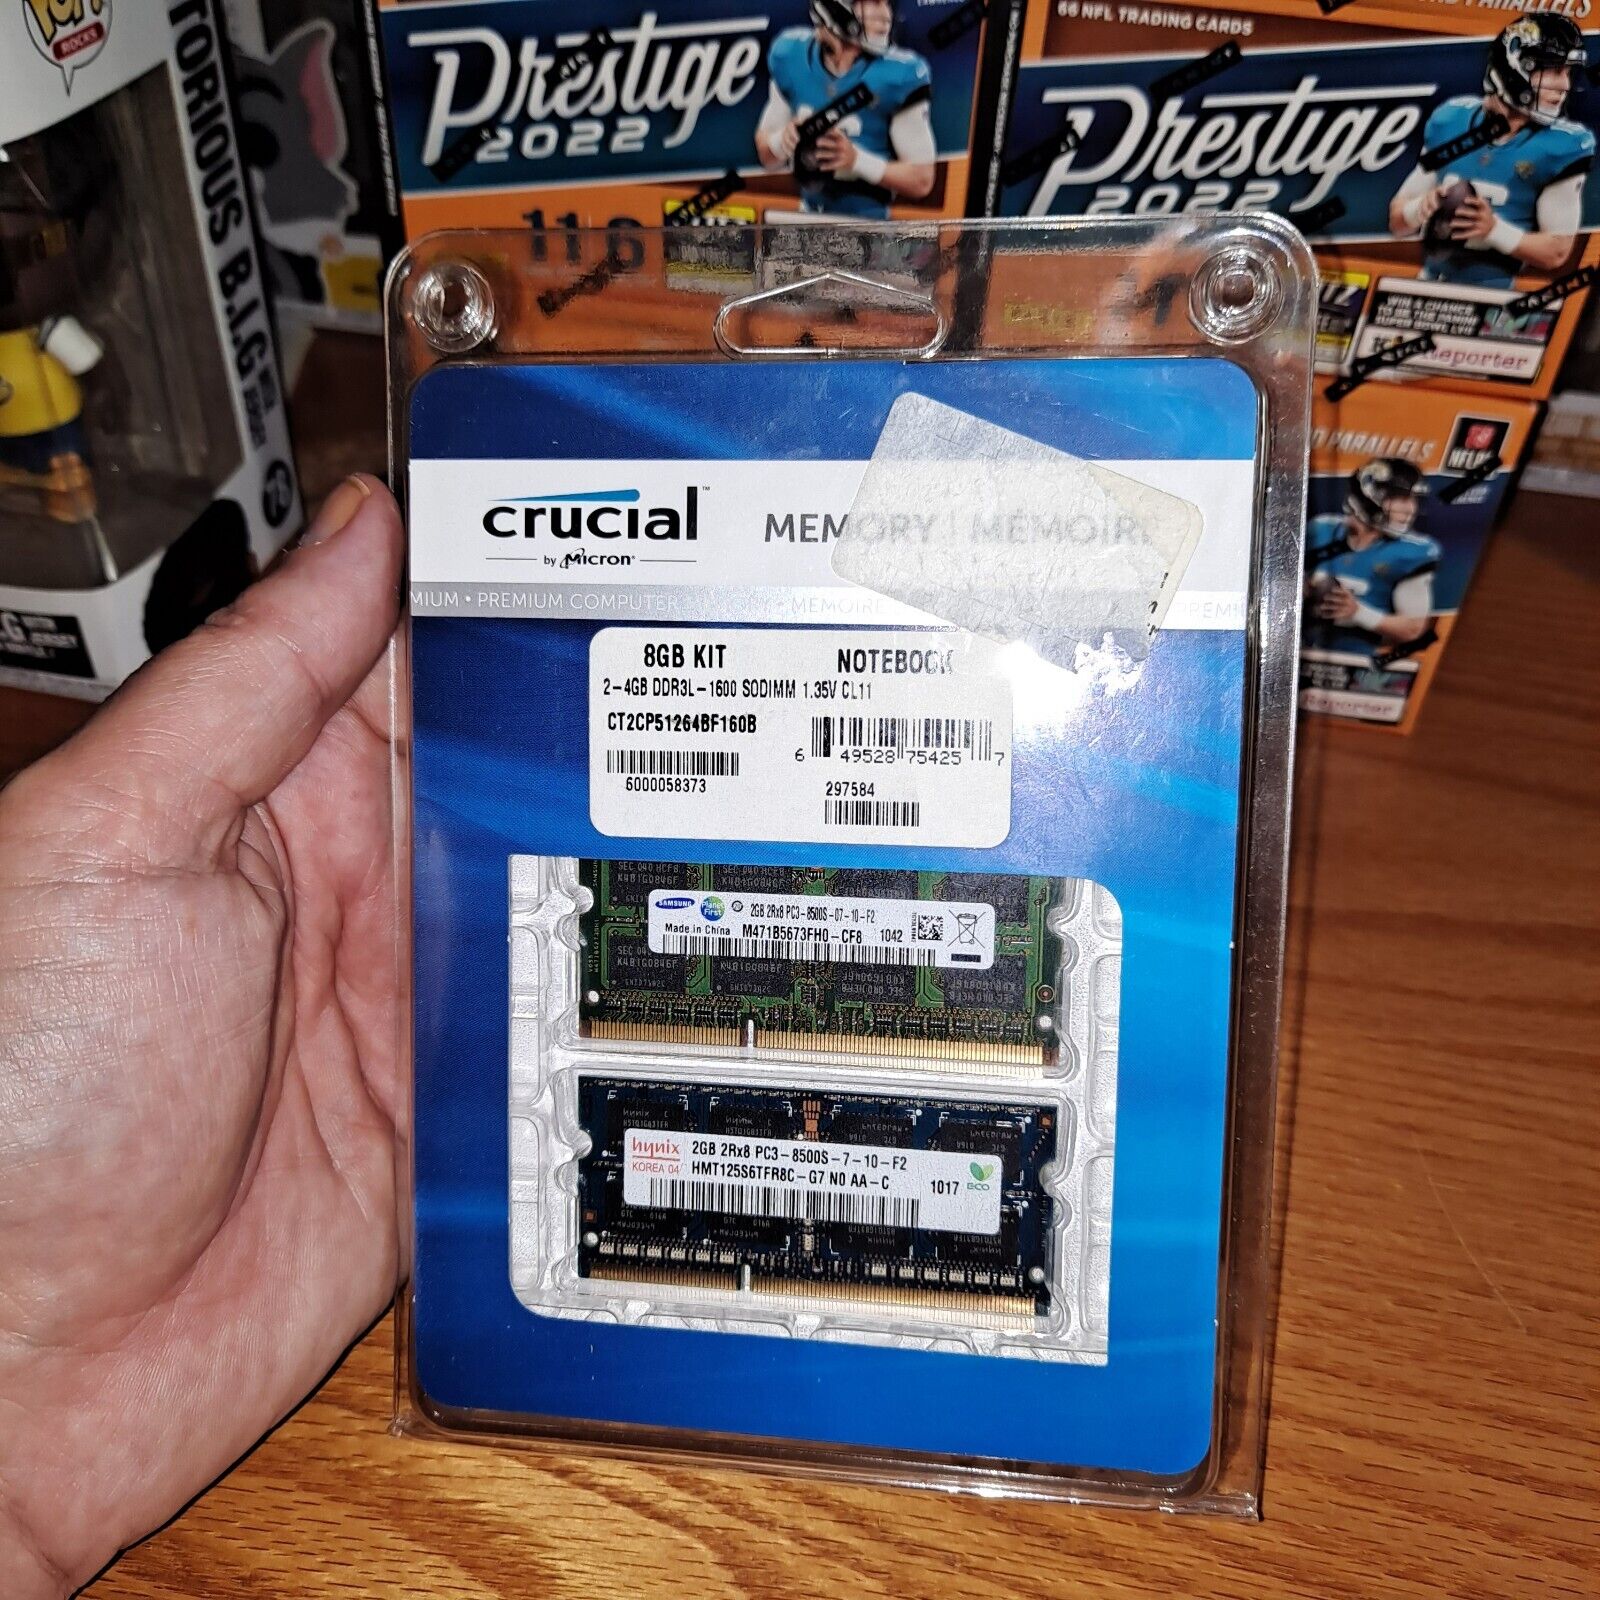 CRUCIAL Memory by Micron 8GB KIT 2-4GB Notebook DDR3L 1600 SODIMM CT2C4G3S160BM